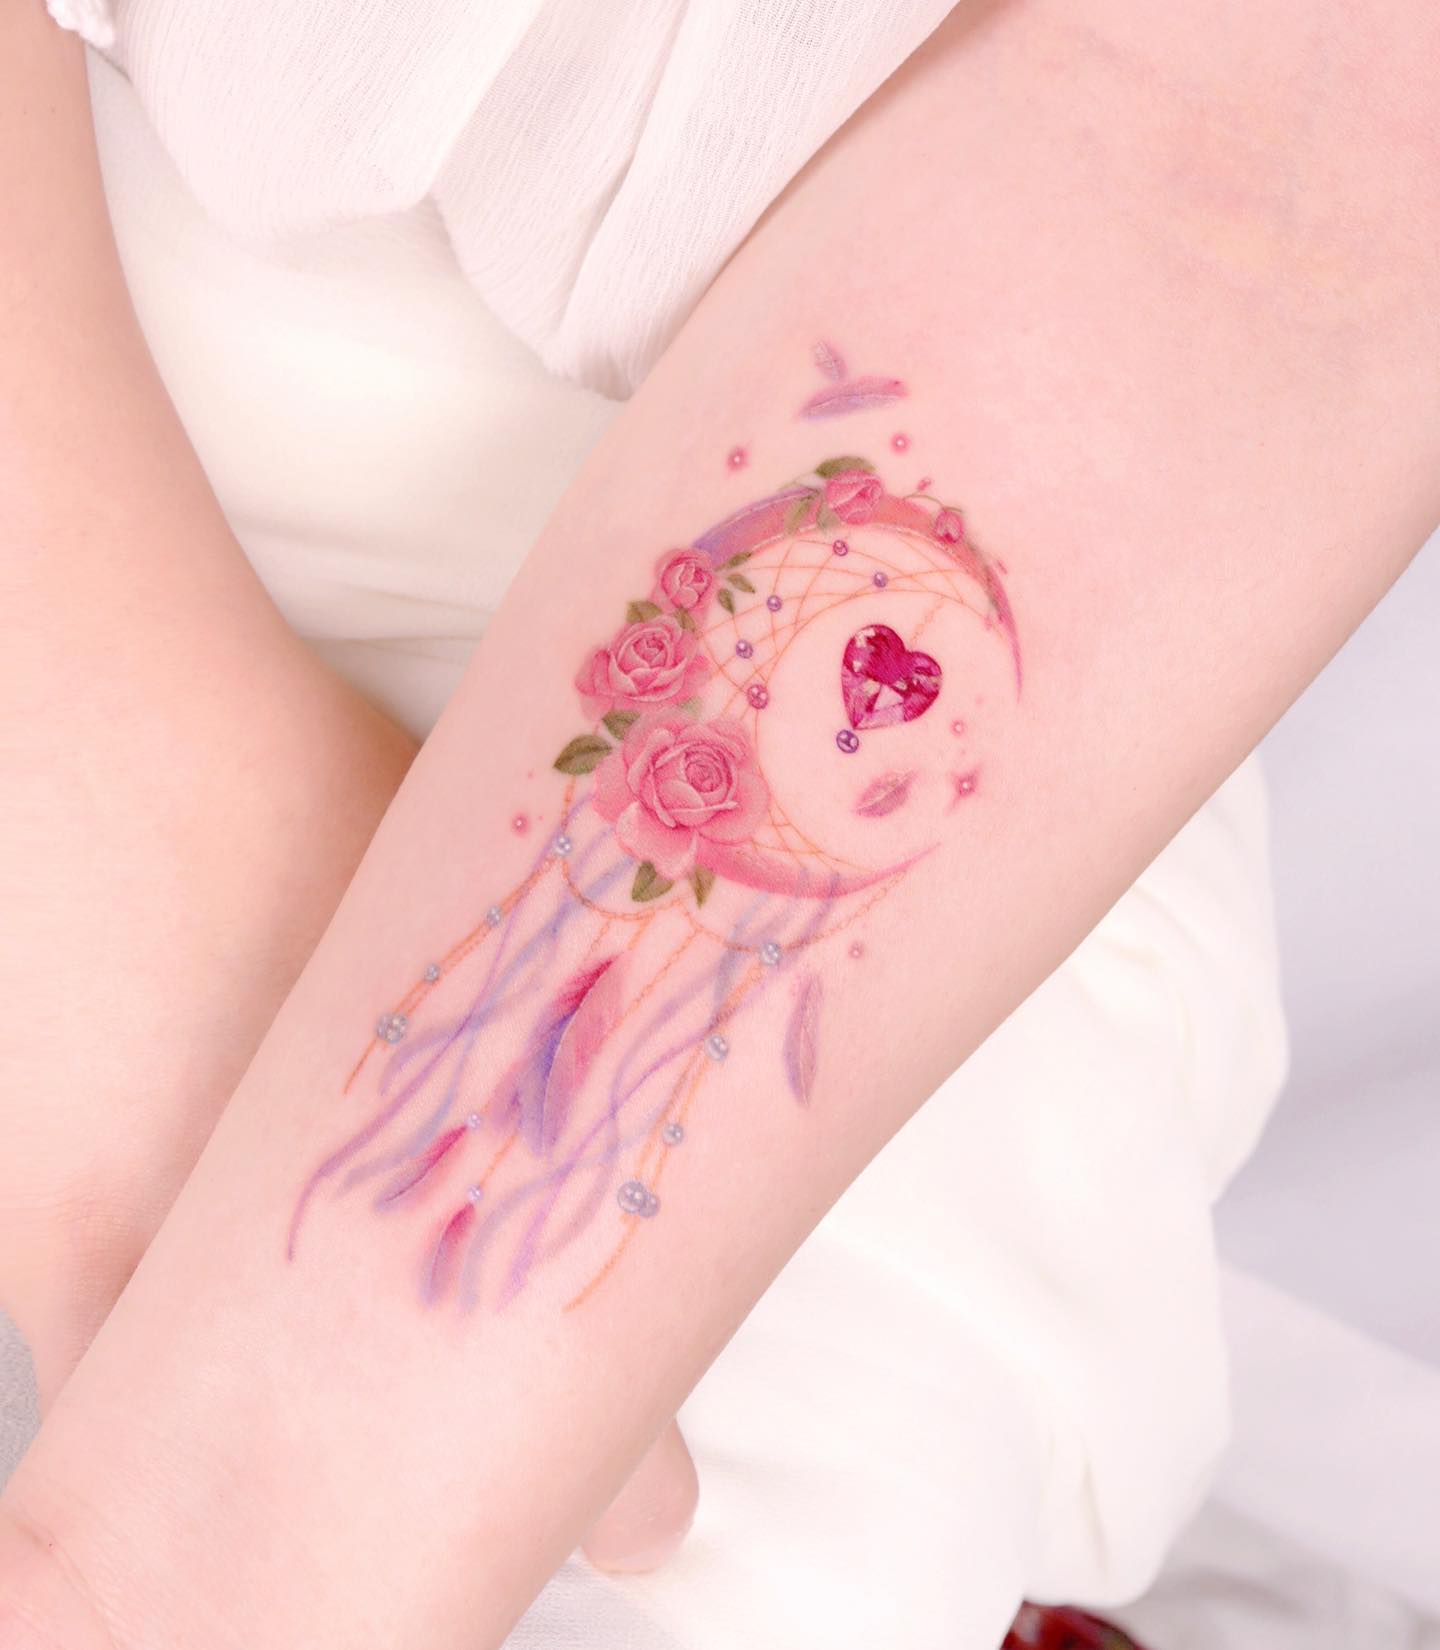 Pink dream catcher tattoo is a tattoo that looks like a dream catcher. It's usually worn by girls who want to look cute while also showing their love for tattoos. The one above is definitely one of the best dream catcher tattoos!